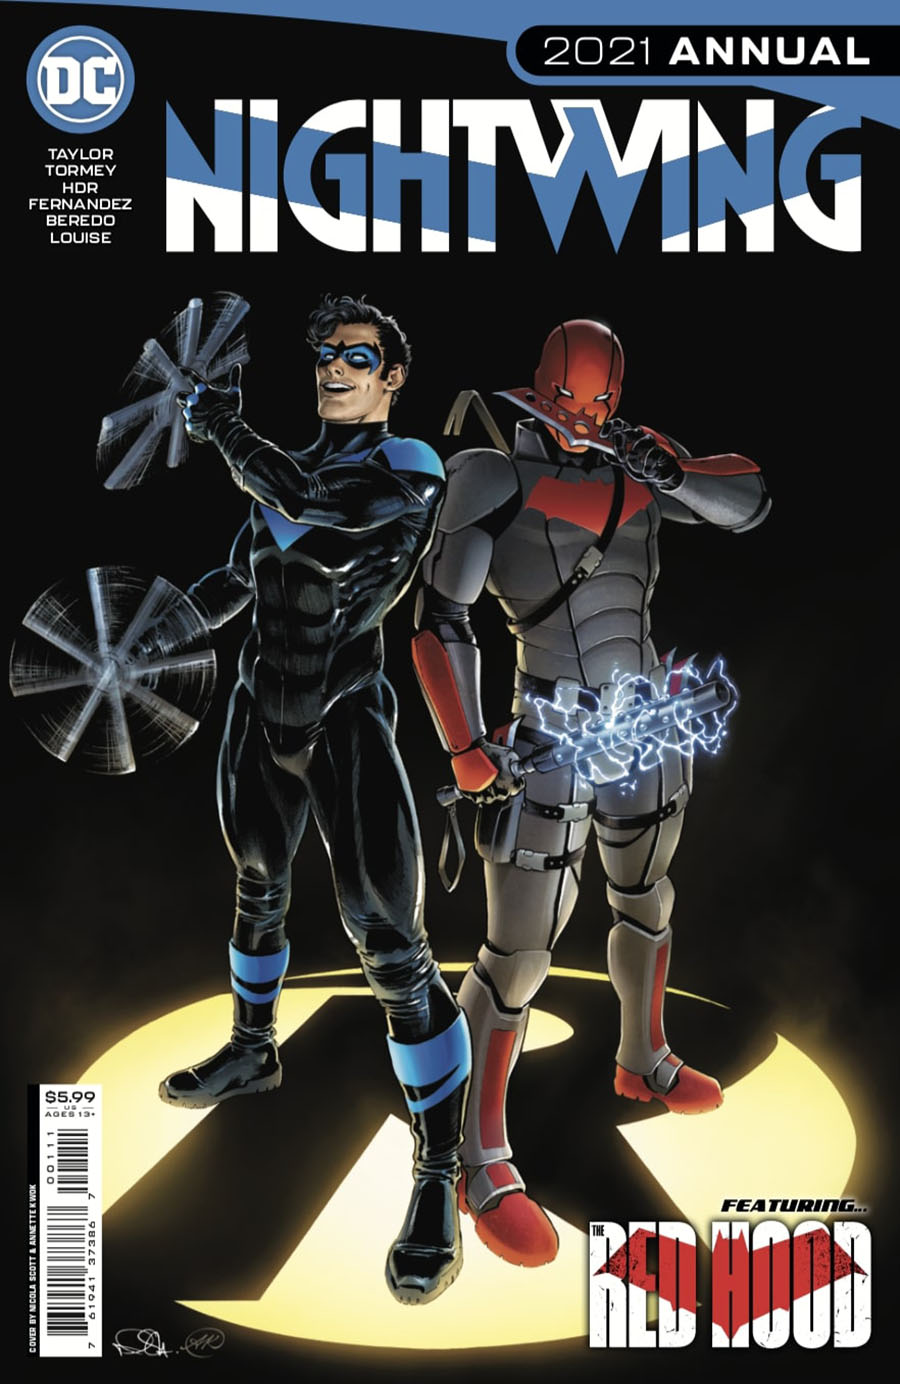 Nightwing Vol 4 2021 Annual #1 (One Shot) Cover A Regular Nicola Scott & Annette Kwok Cover